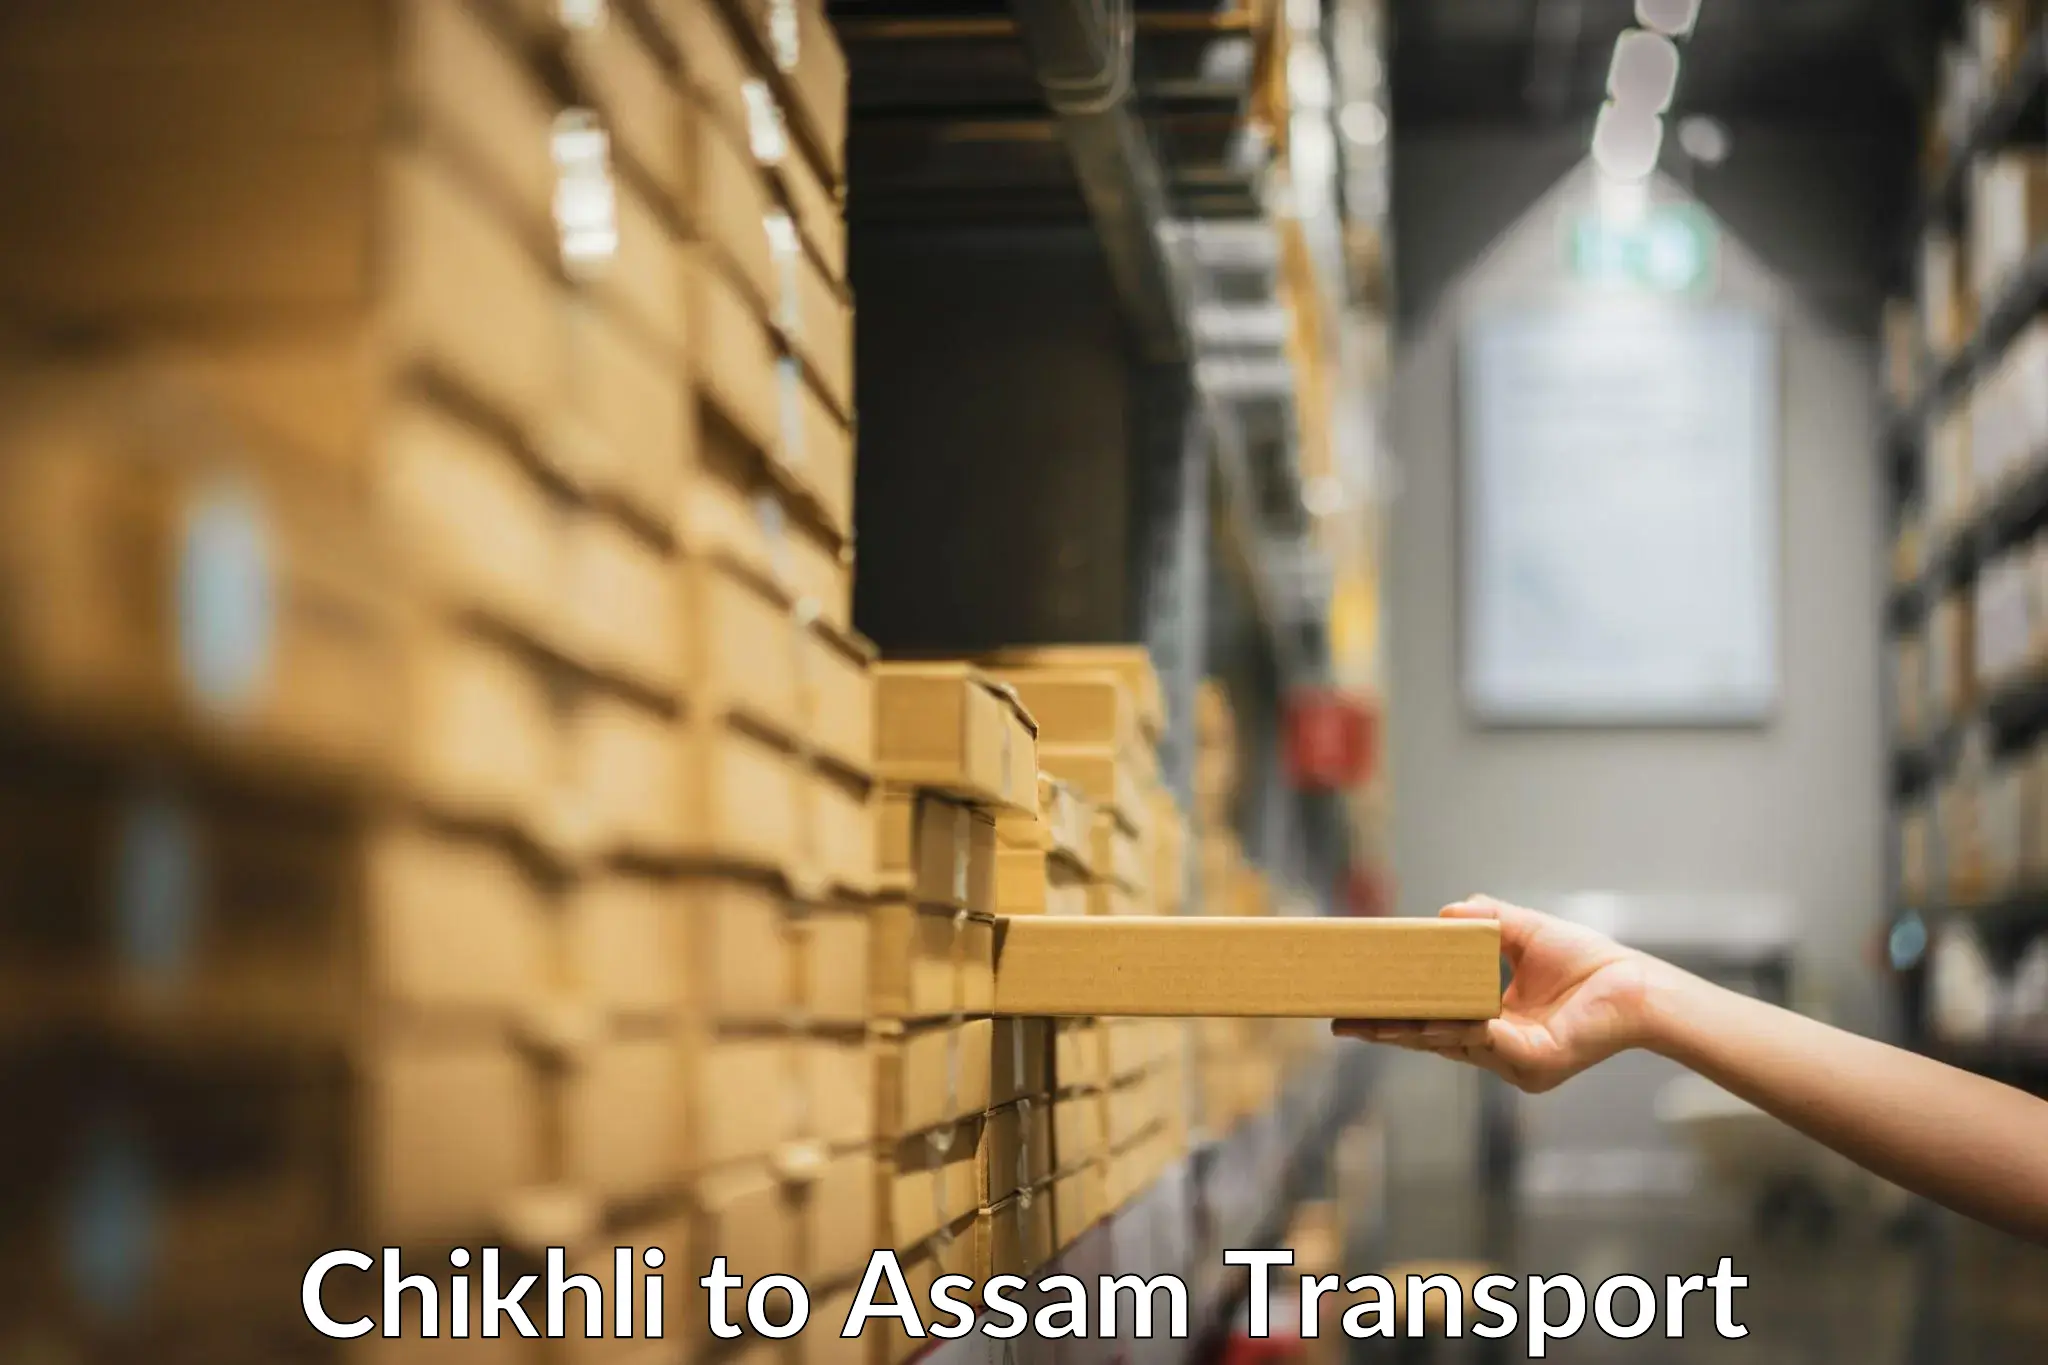 Goods delivery service Chikhli to Guwahati University